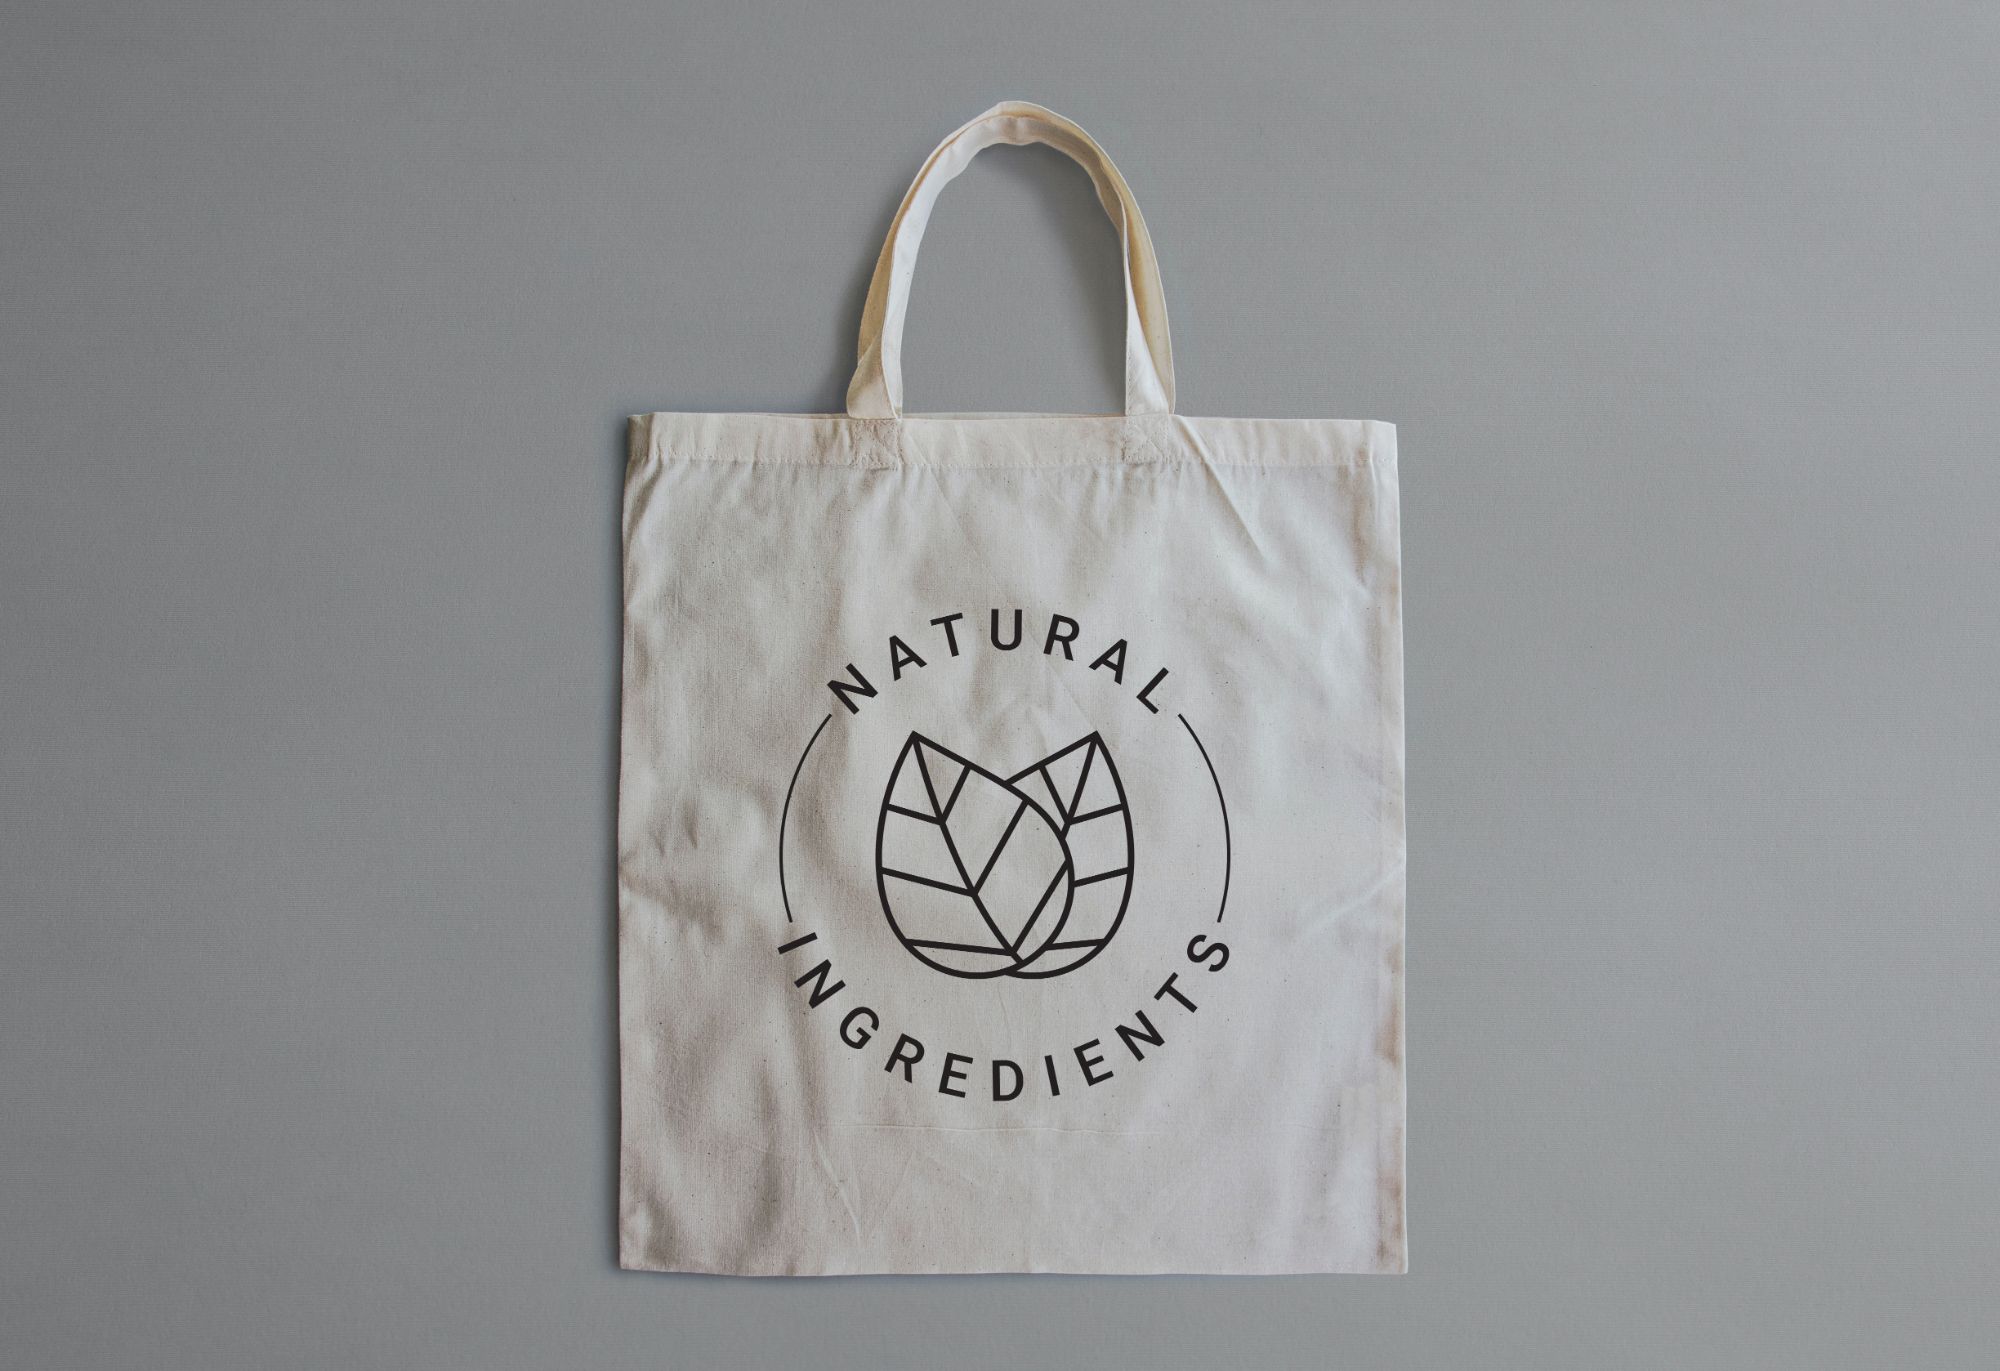 Decorated canvas bag with Natural Ingredients logo printed in New Orleans